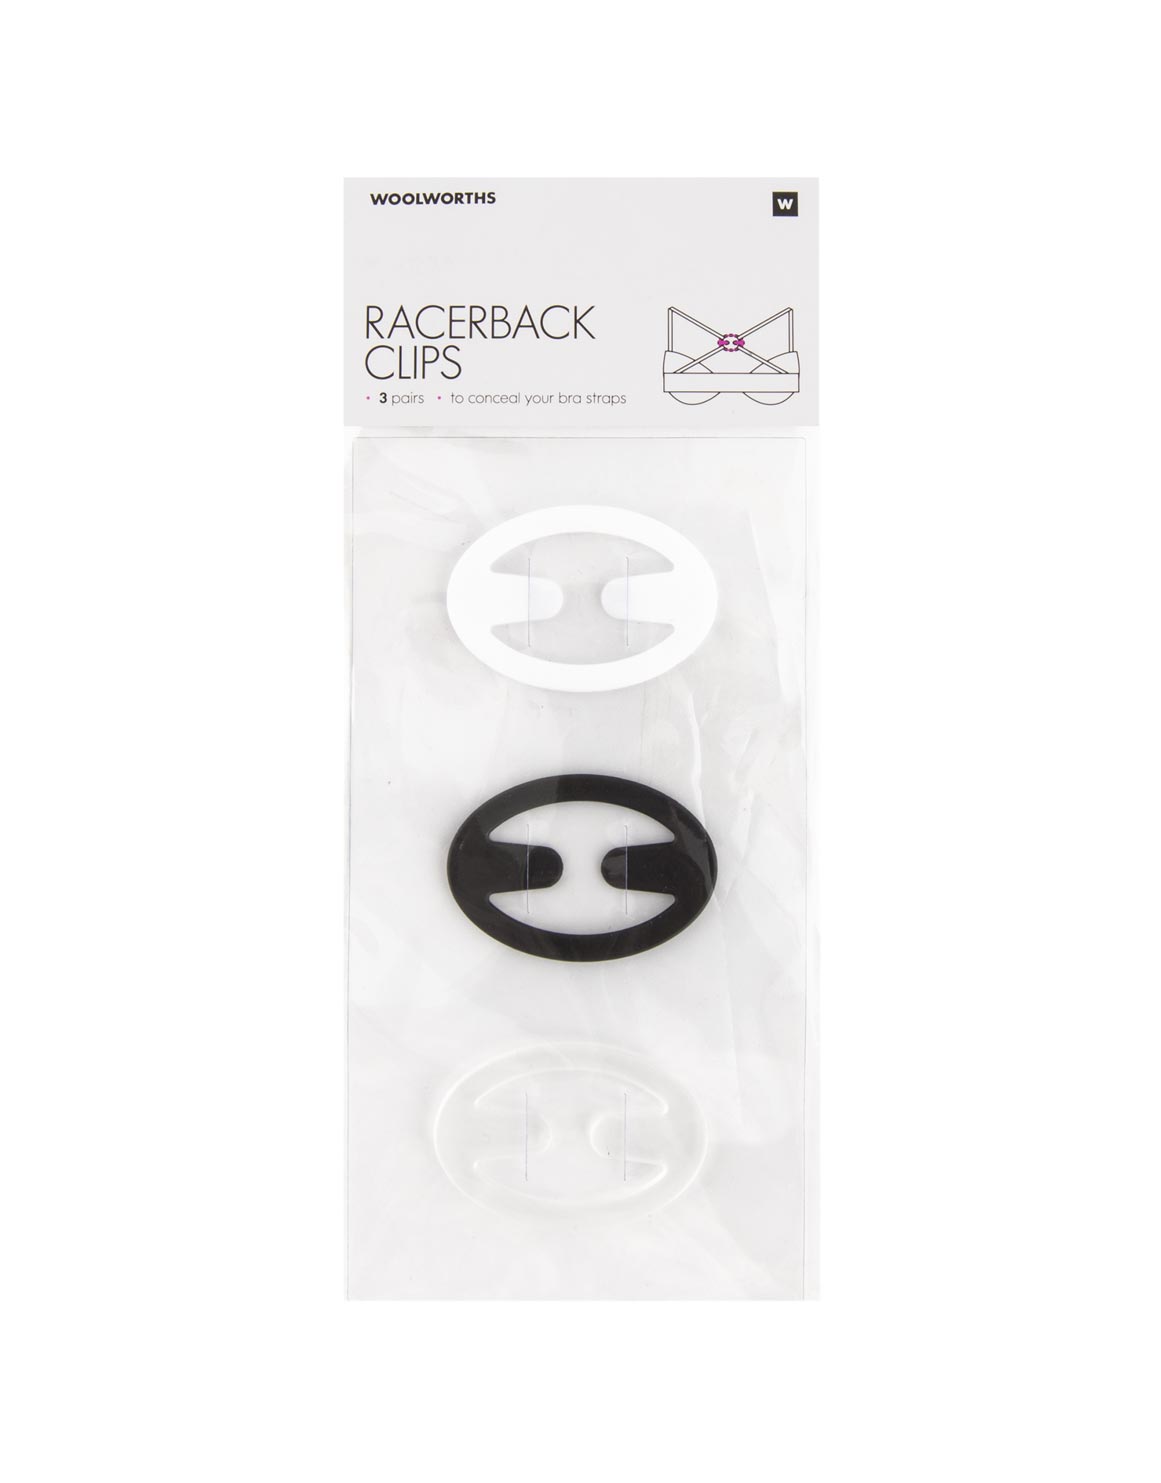 Racerback Bra Clips 3 Pack - Woolworths Mauritius Online